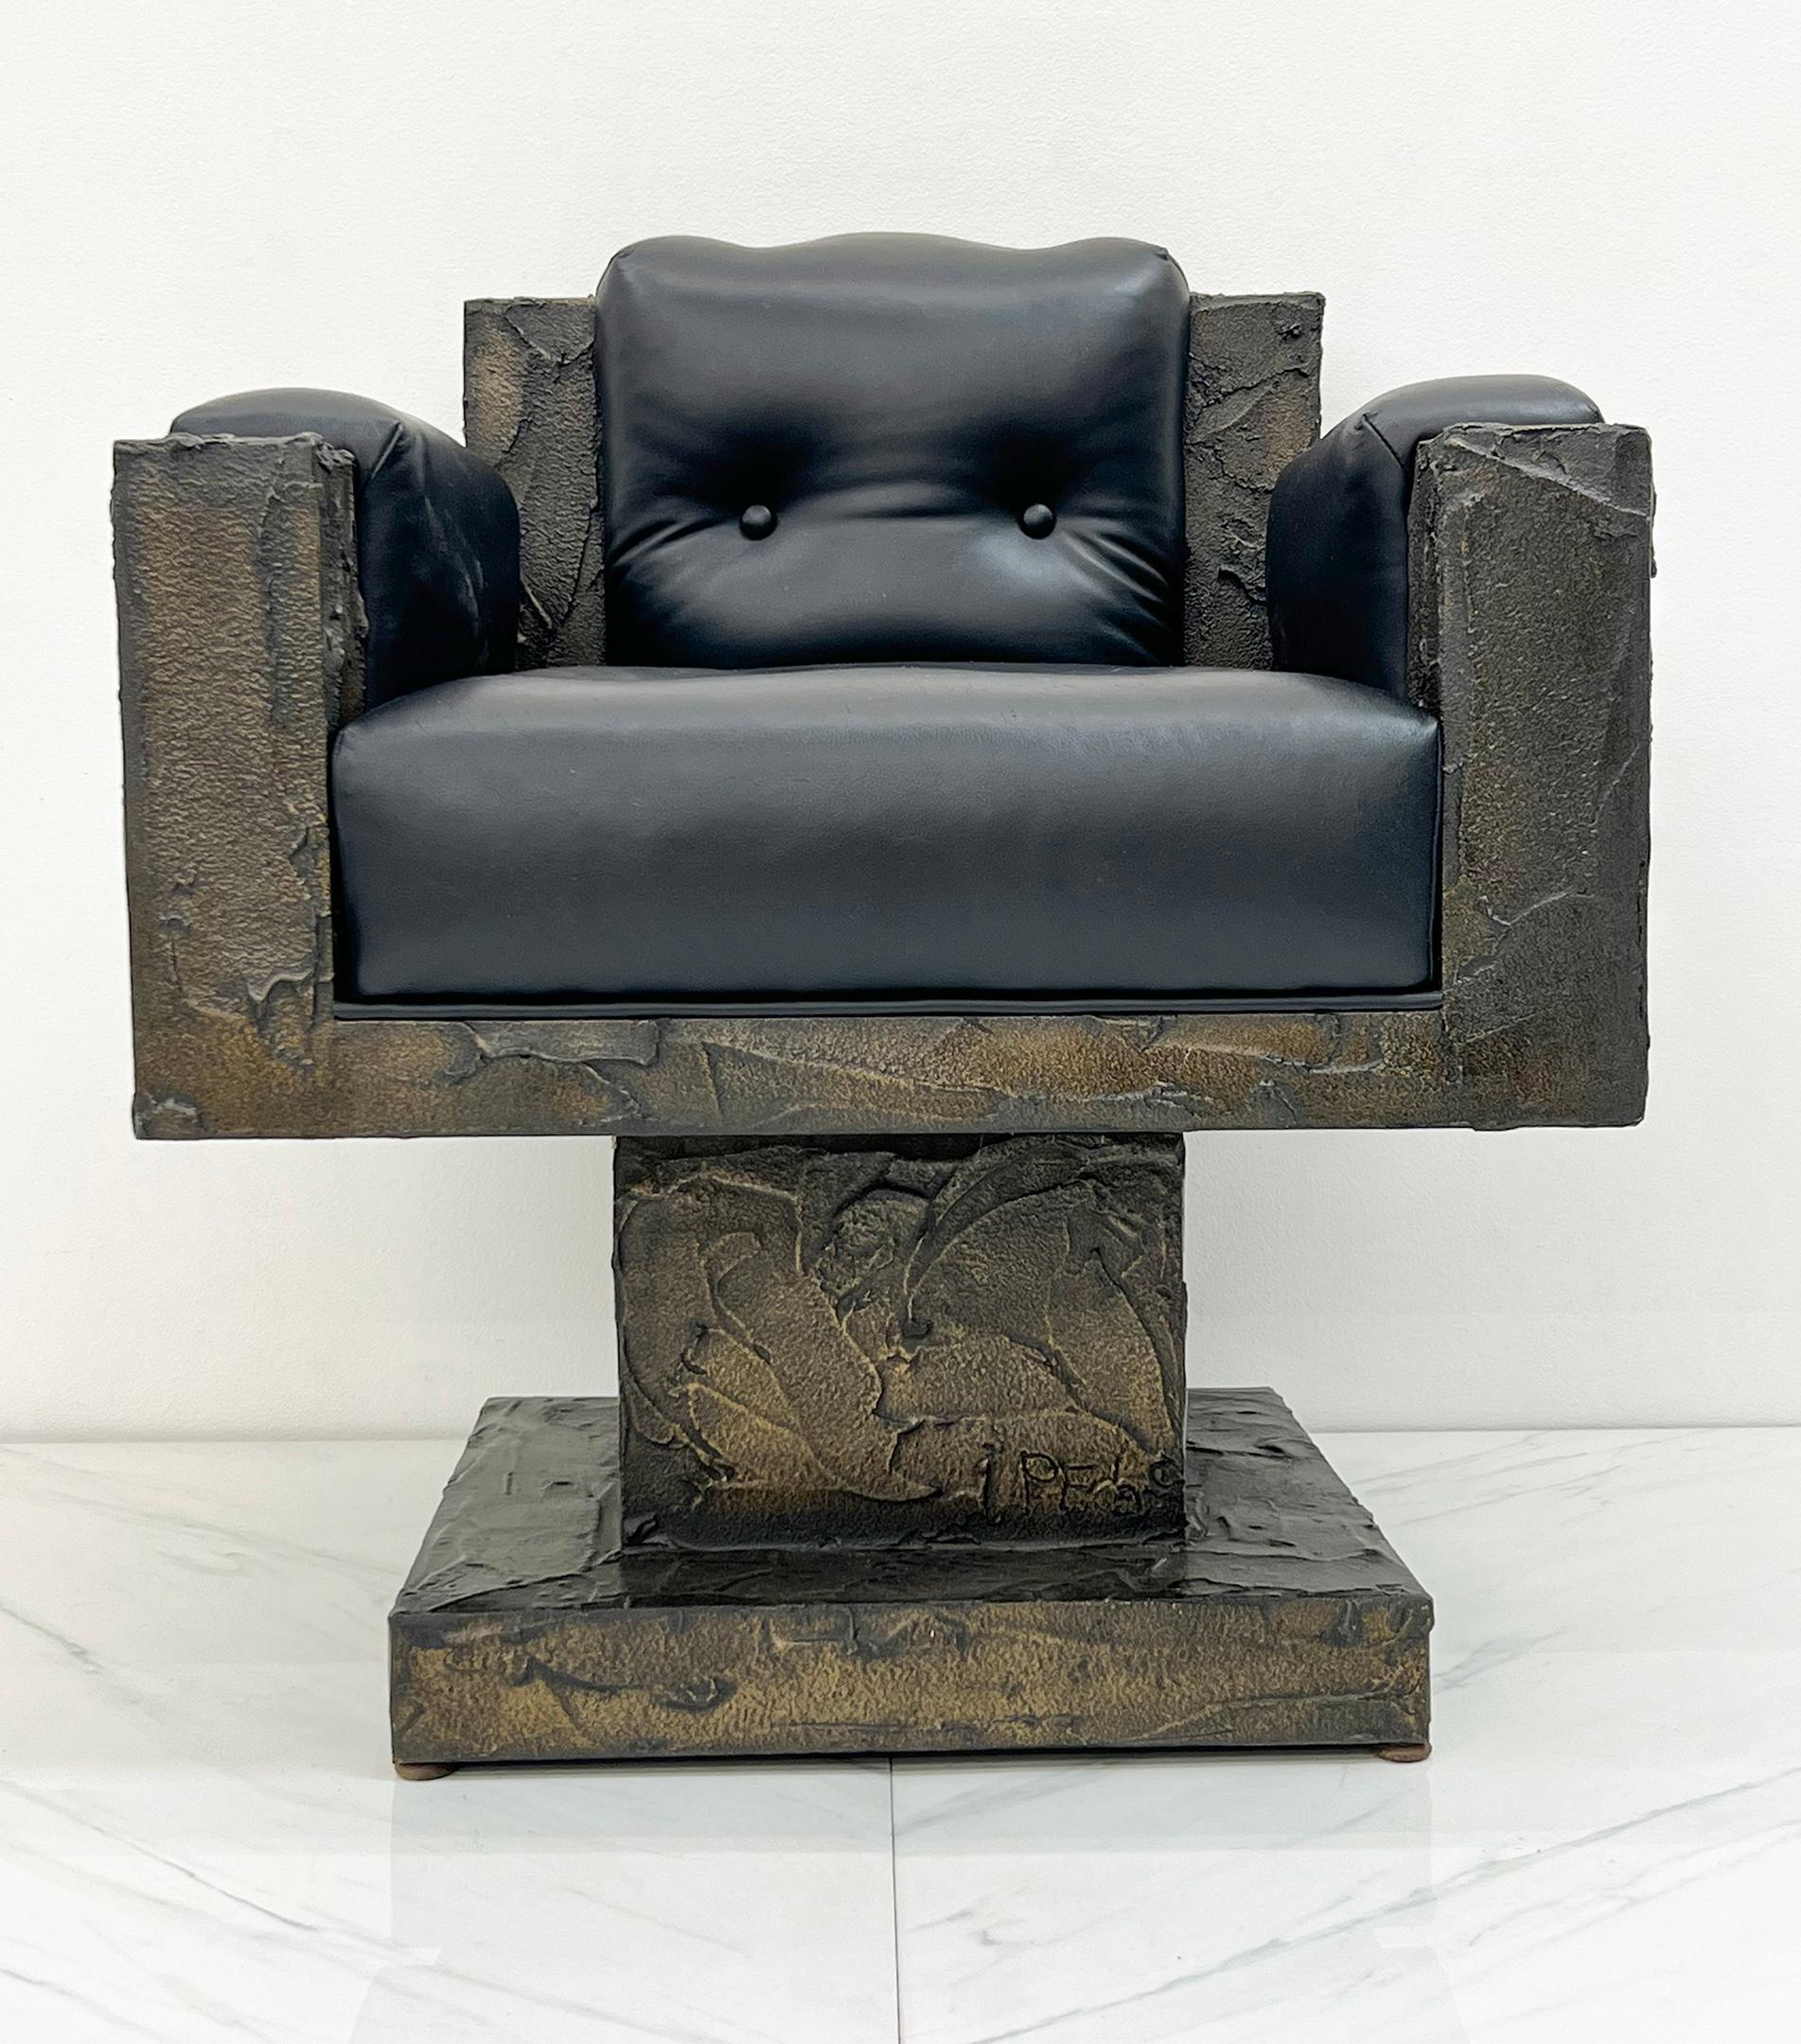 Early Paul Evans Sculpted Bronze Throne Chair, Signed and Dated, 1969 In Good Condition For Sale In Culver City, CA